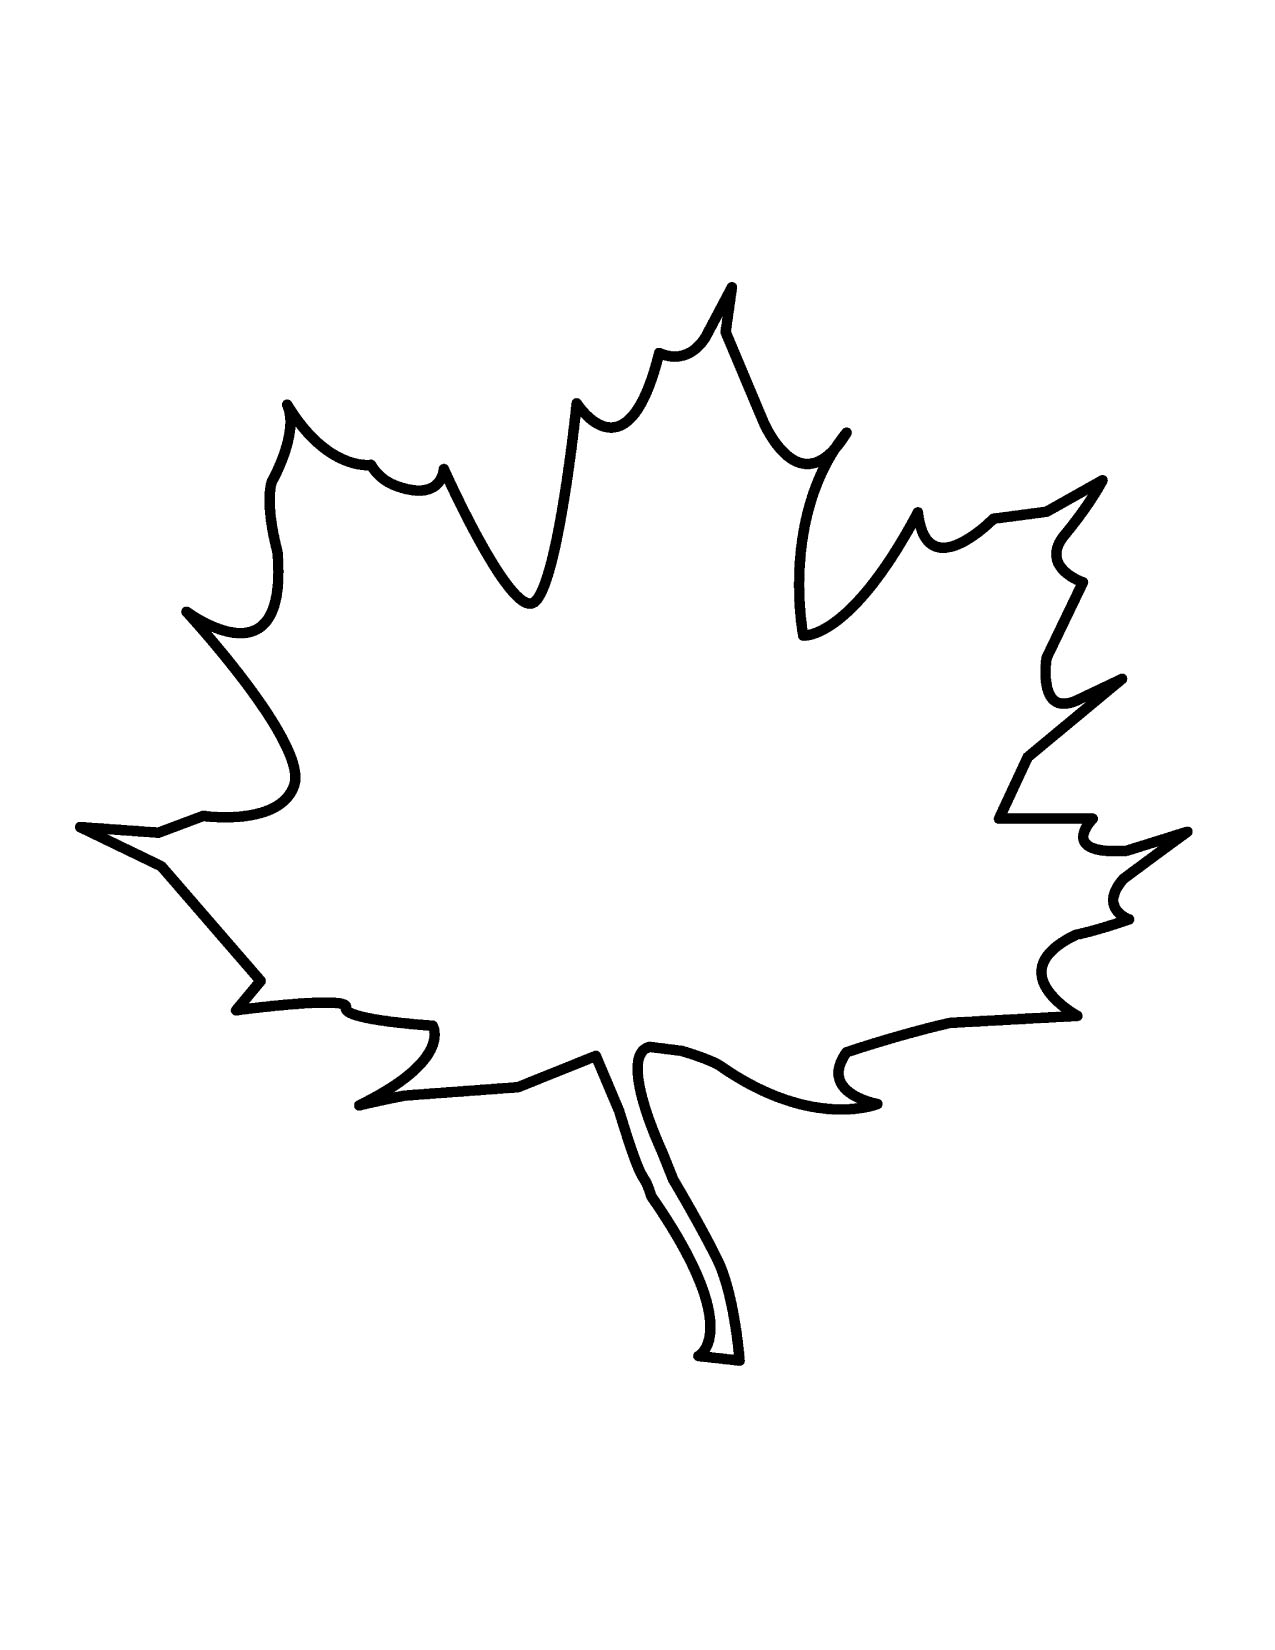 Maple Leaf Image - ClipArt Best